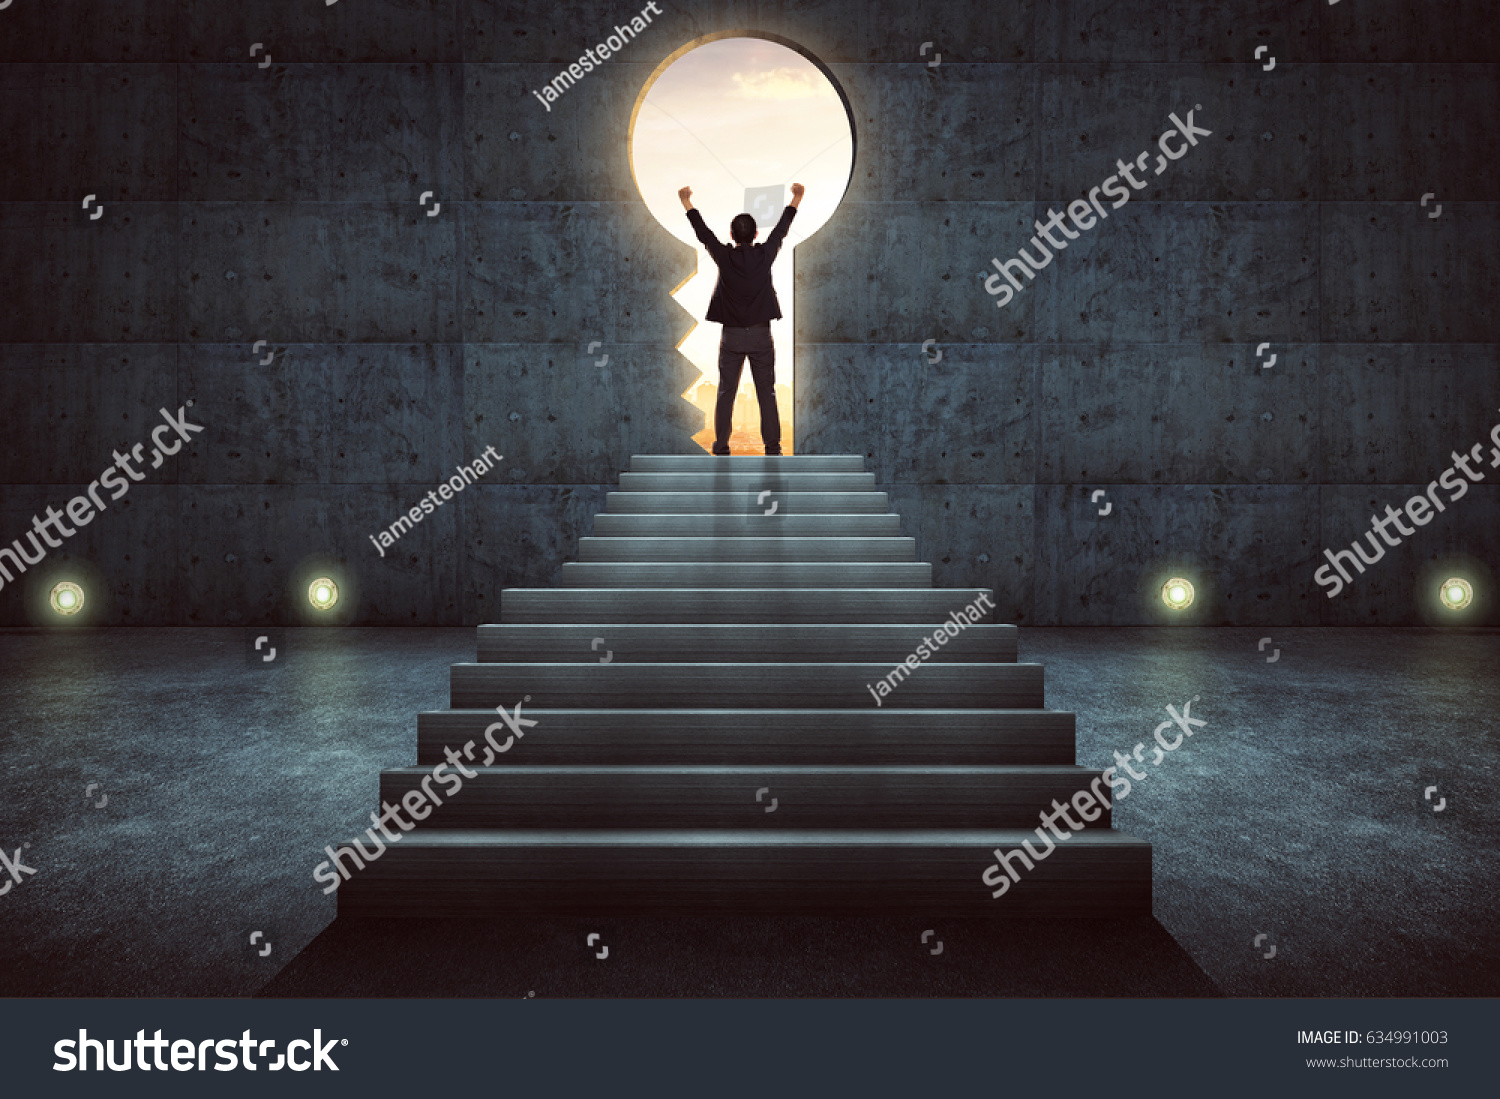 Success businessman cheering on stair against concrete wall with key hole door ,sunrise scene city skyline outdoor view . #634991003